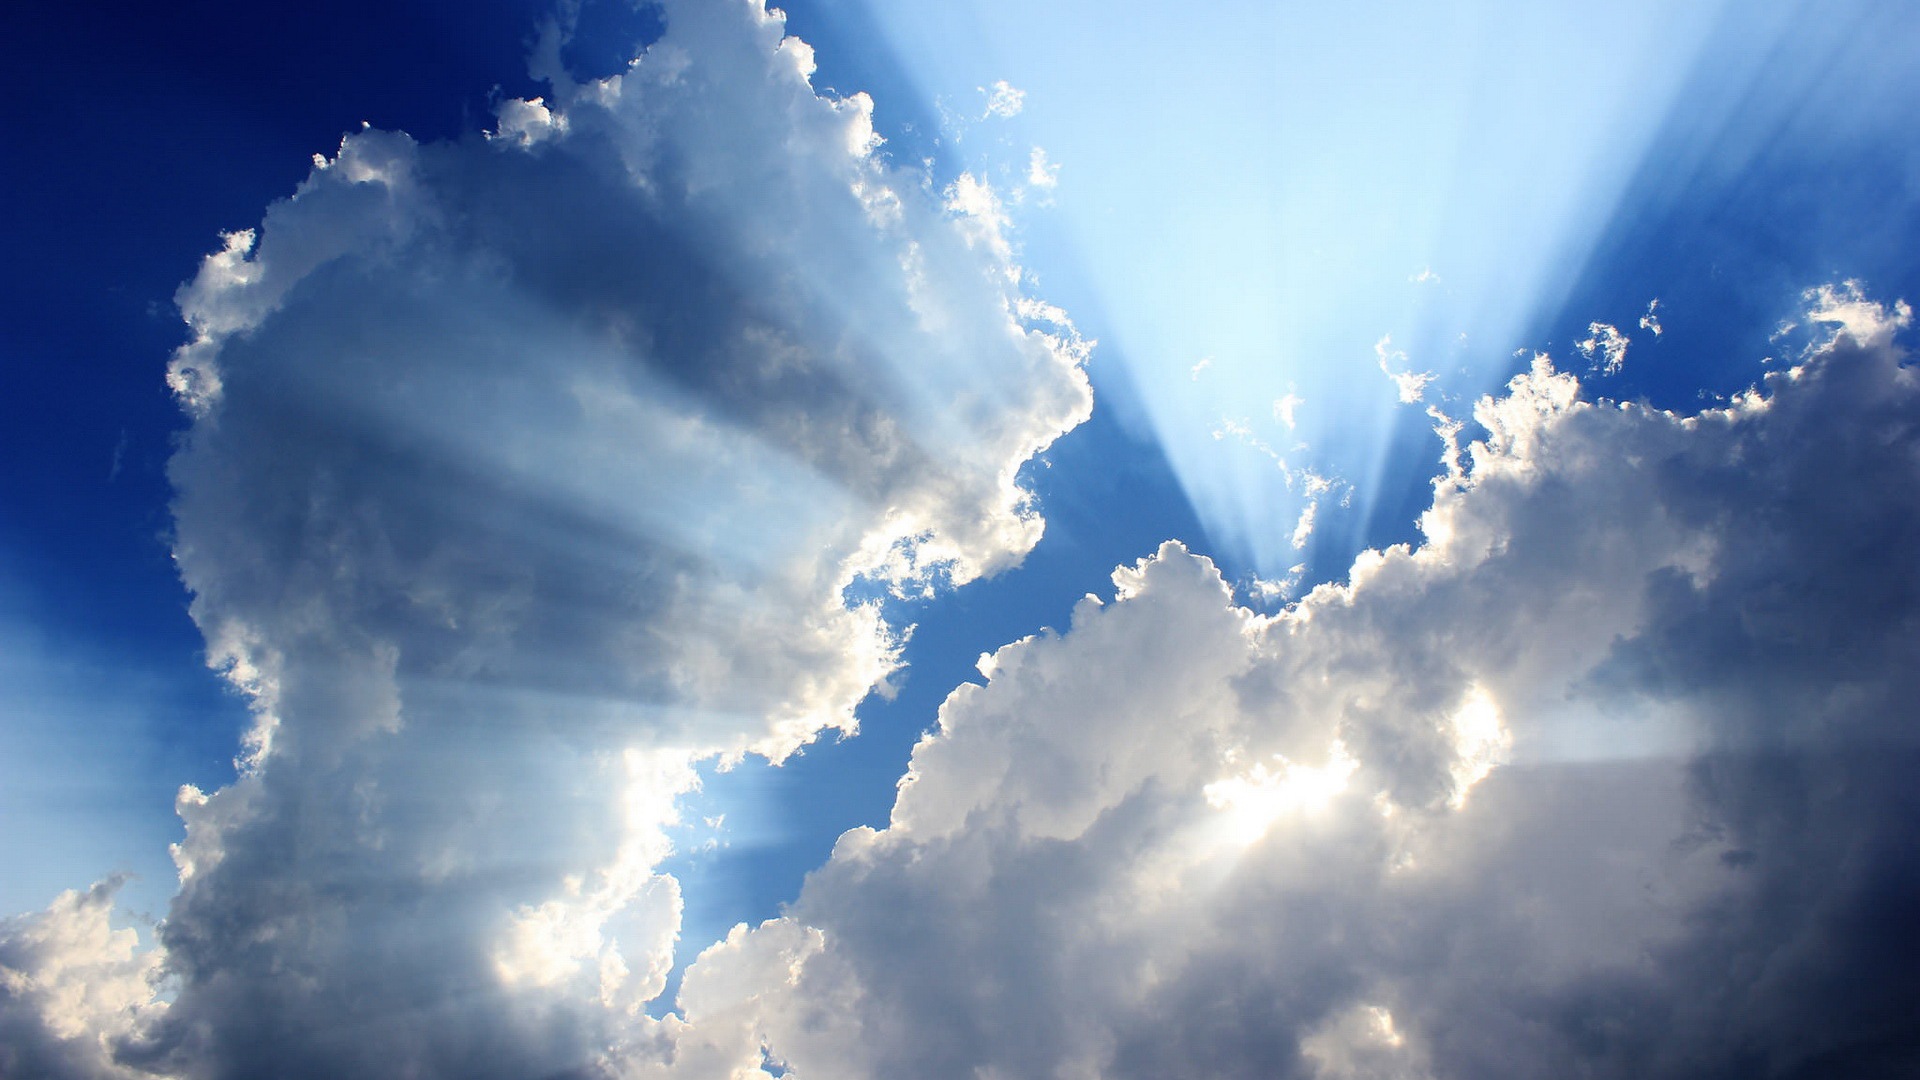 Linux Mint 15 Olivia Hd Wallpapers - Sun Rays With Clouds Hd , HD Wallpaper & Backgrounds